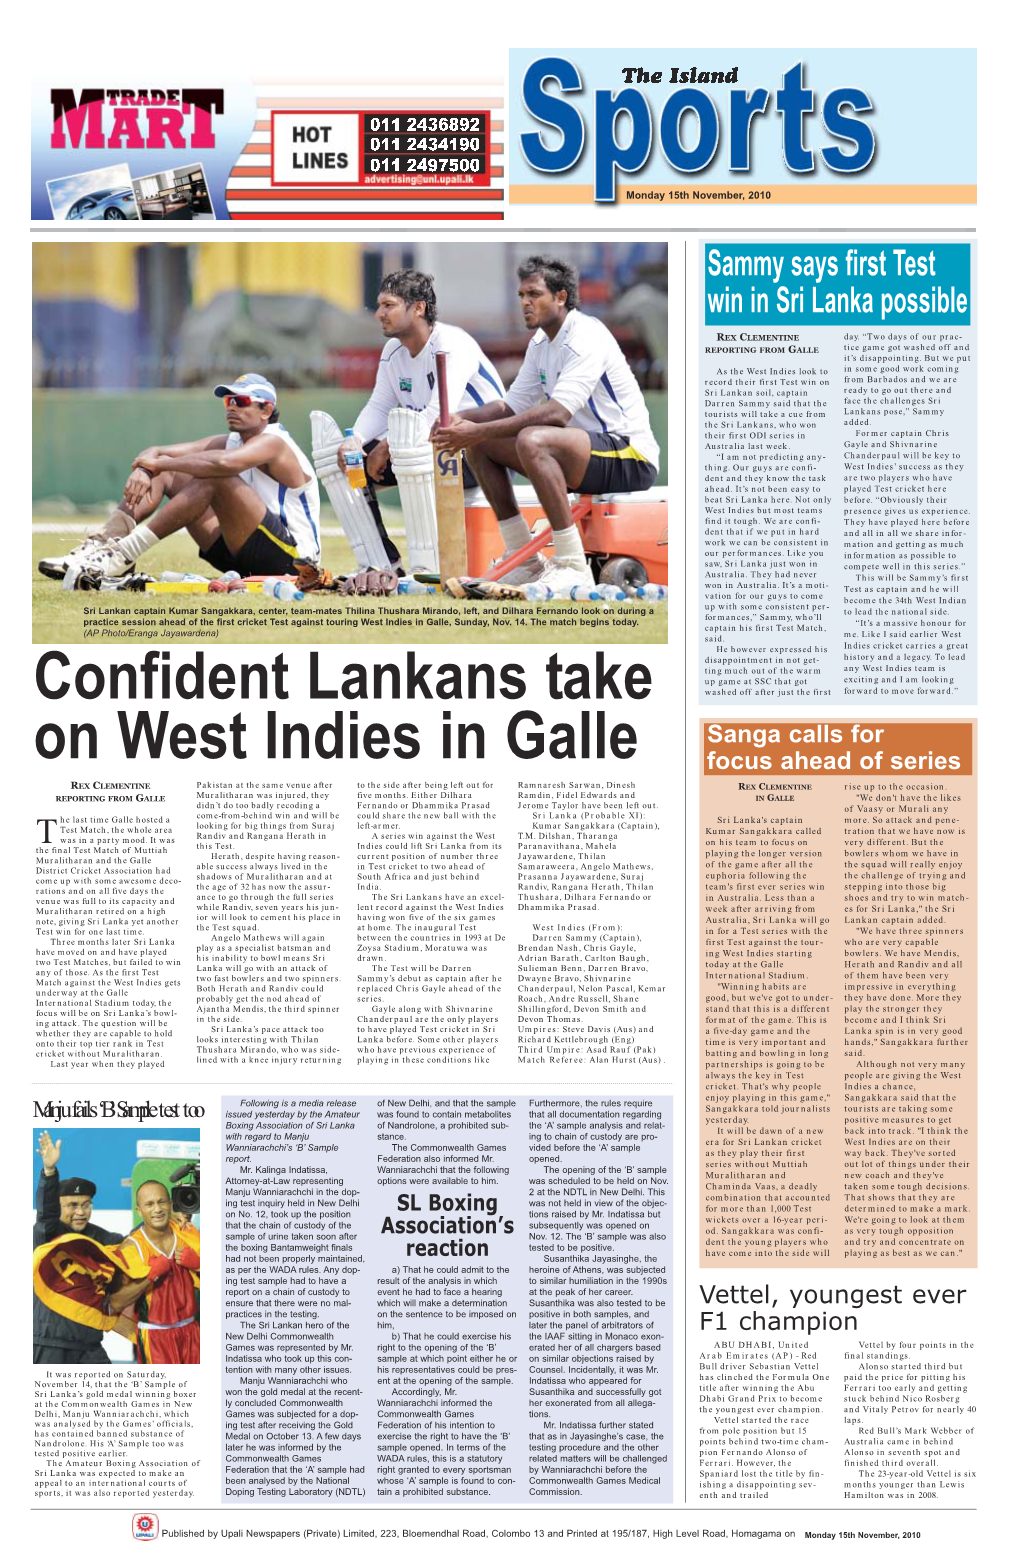 Confident Lankans Take on West Indies in Galle